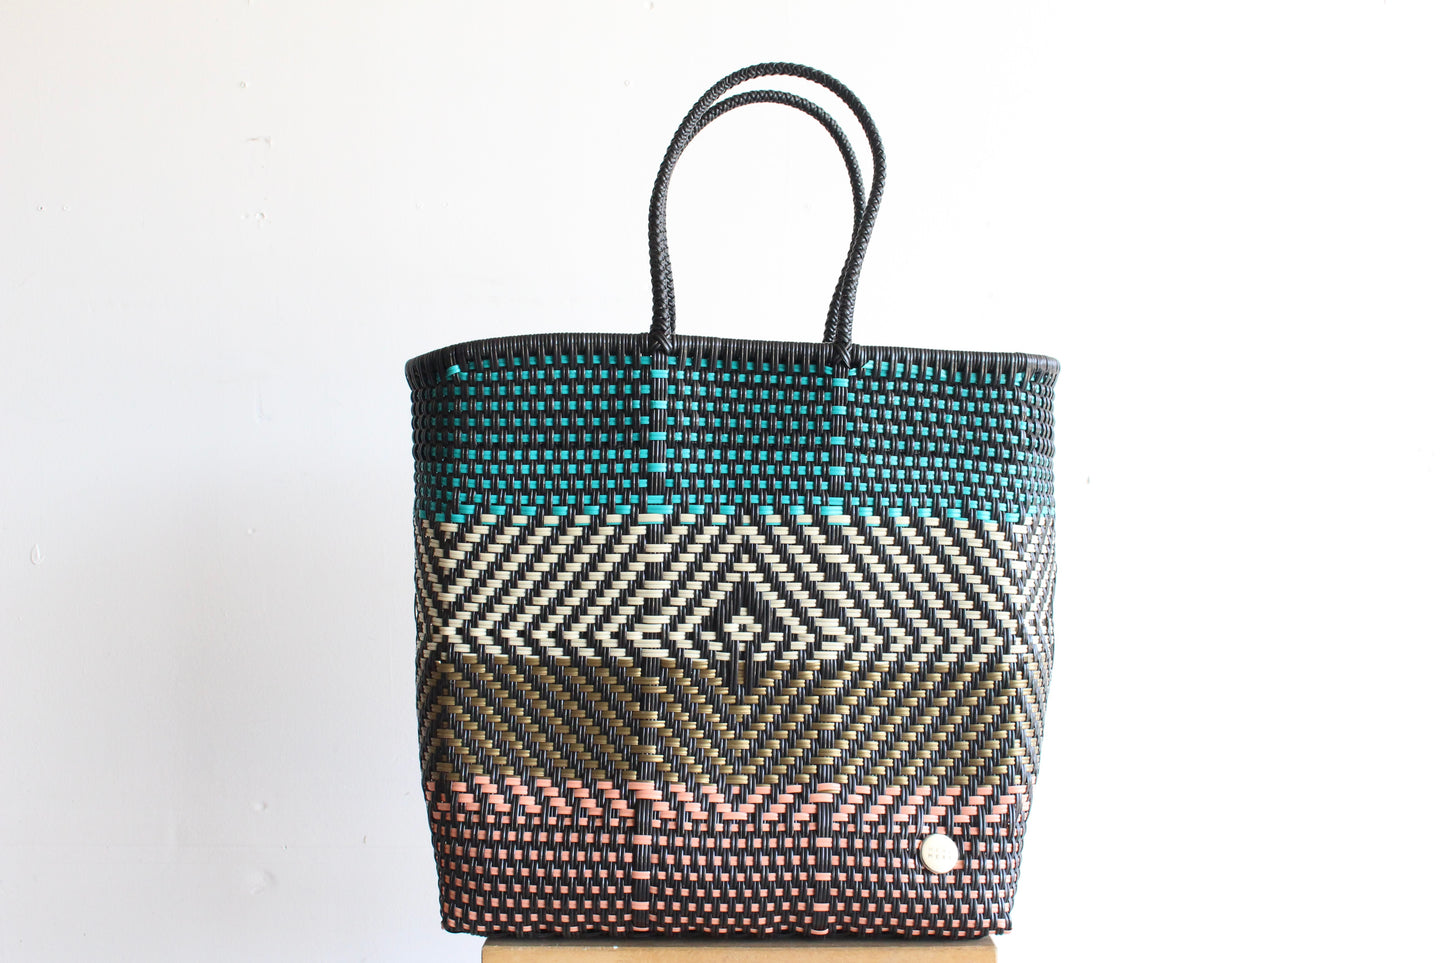 Colorful Tote bag by MexiMexi